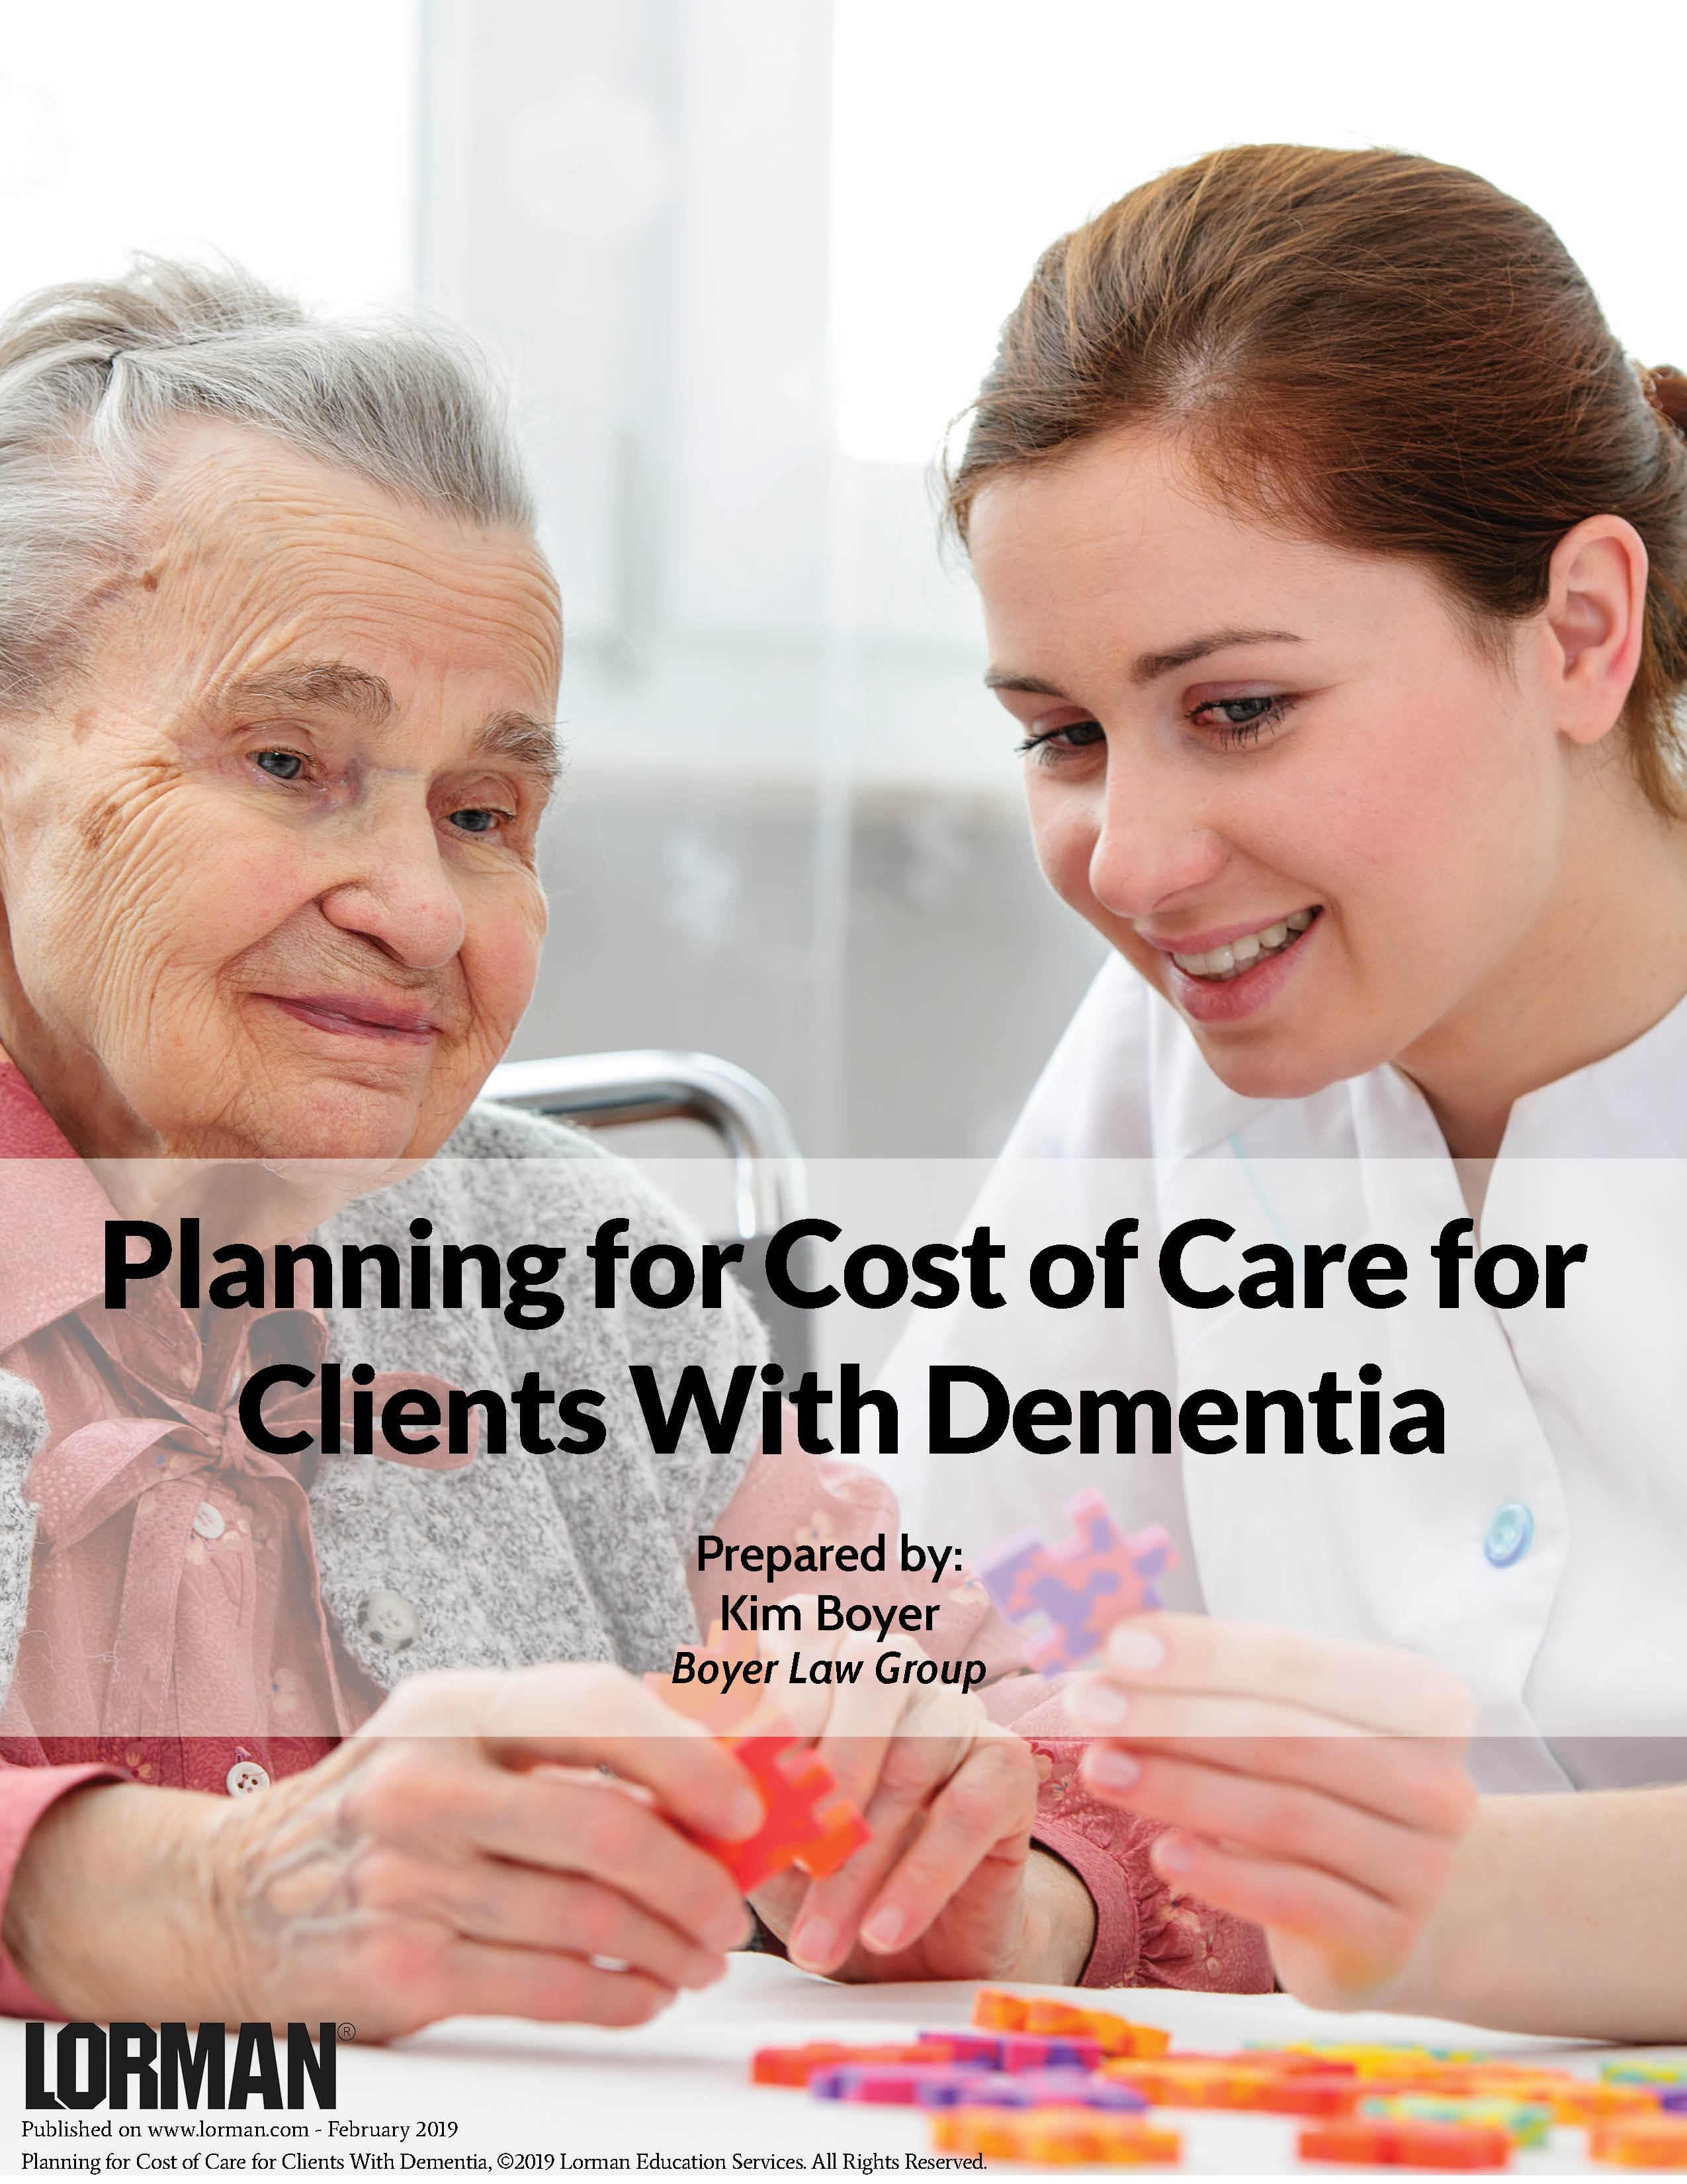 Planning for Cost of Care for Clients With Dementia